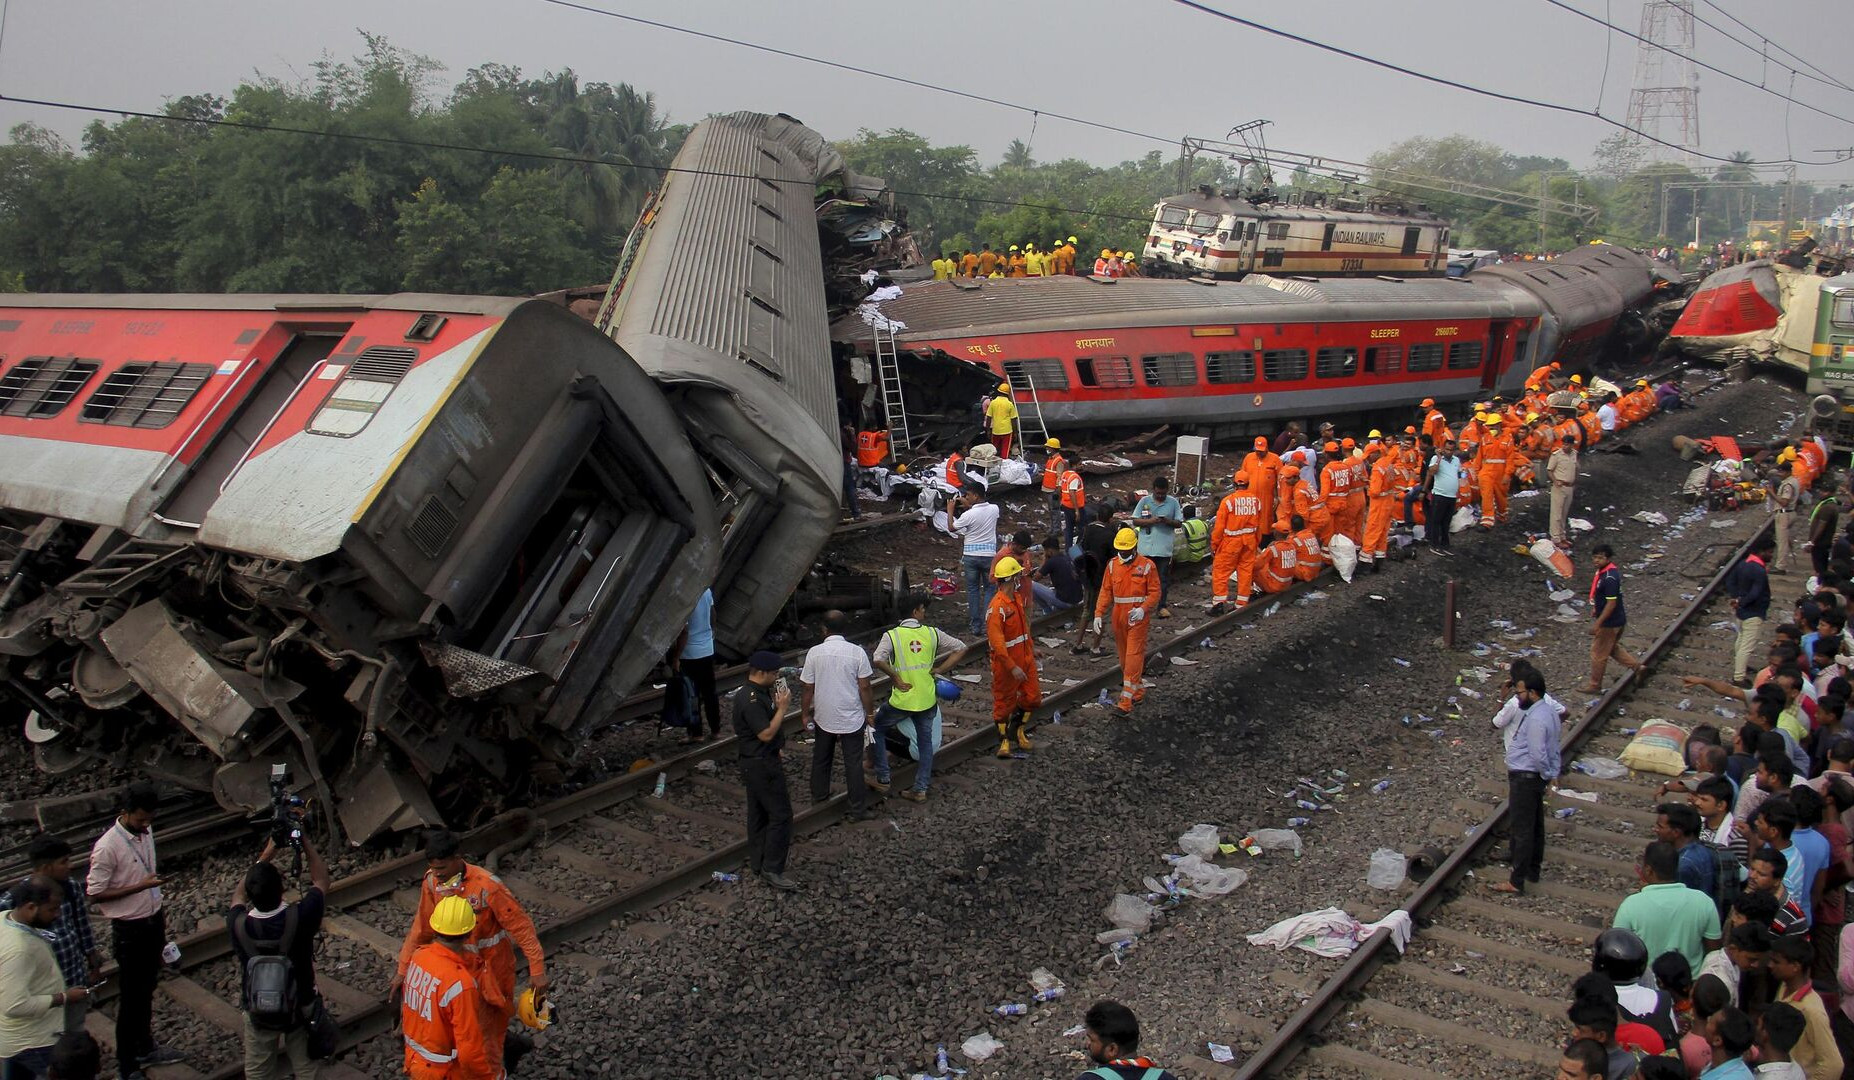 About 300 people killed and 900 injured as a result of train collision in India